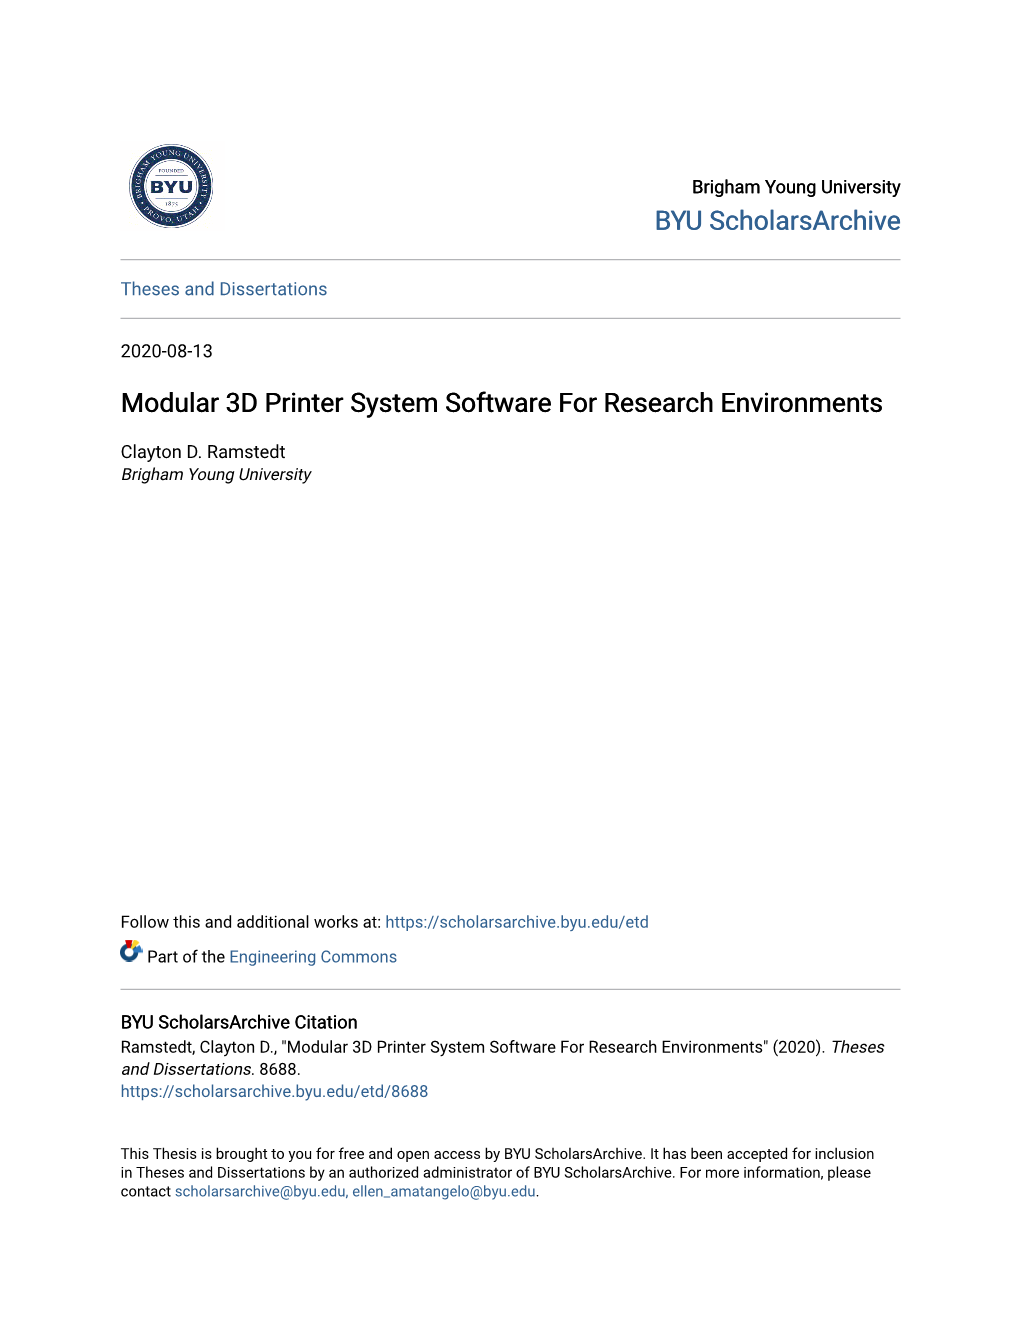 Modular 3D Printer System Software for Research Environments